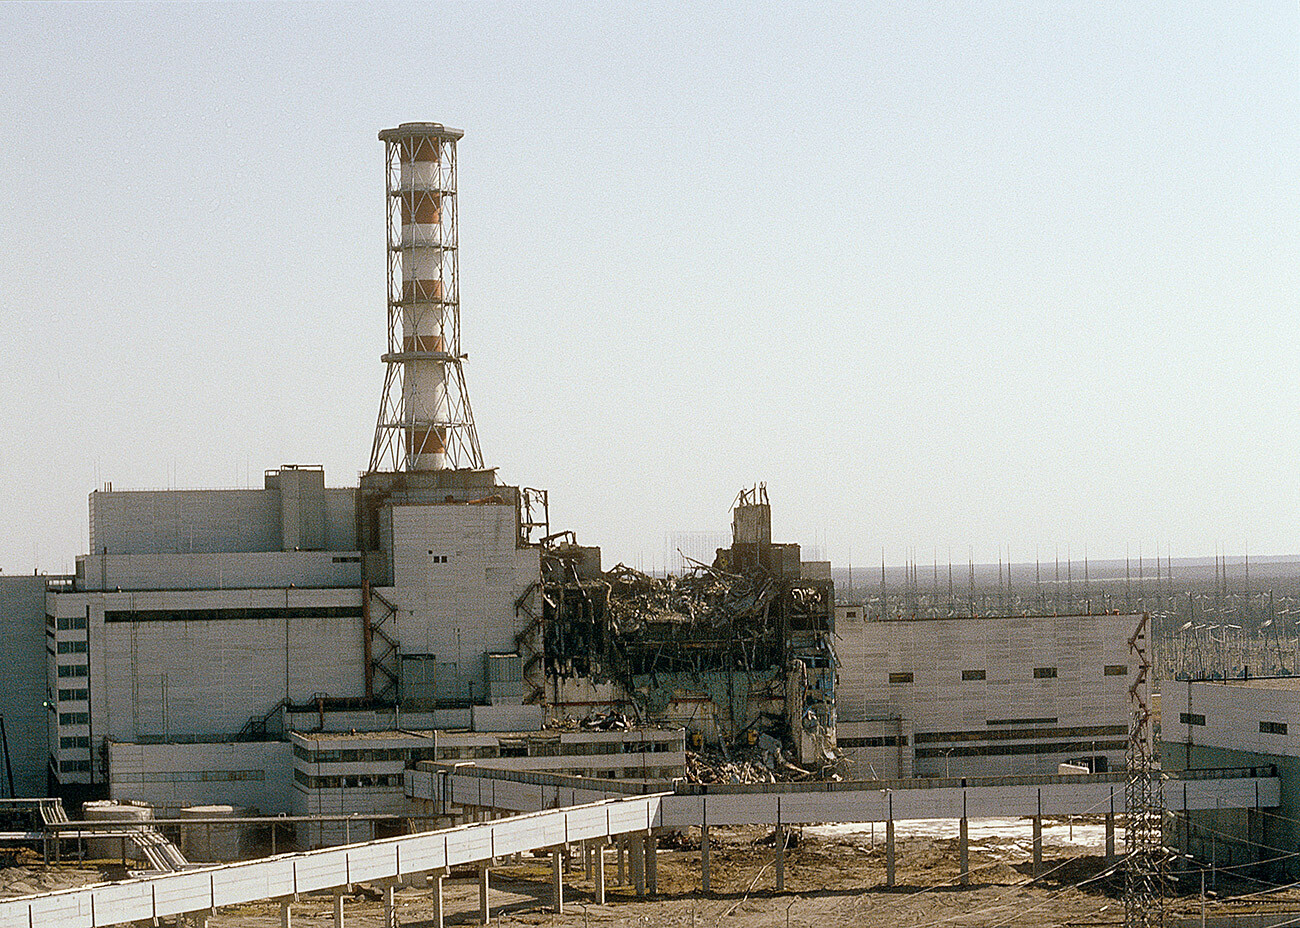 The Chernobyl Nuclear Power Station as seen from the fourth power unit, after an accident on April 26, 1986.

